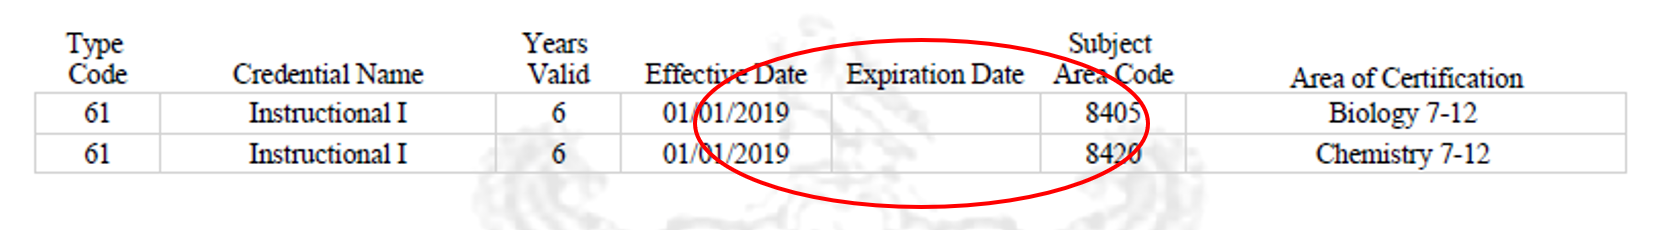 example of certificate without a calculated expiration date